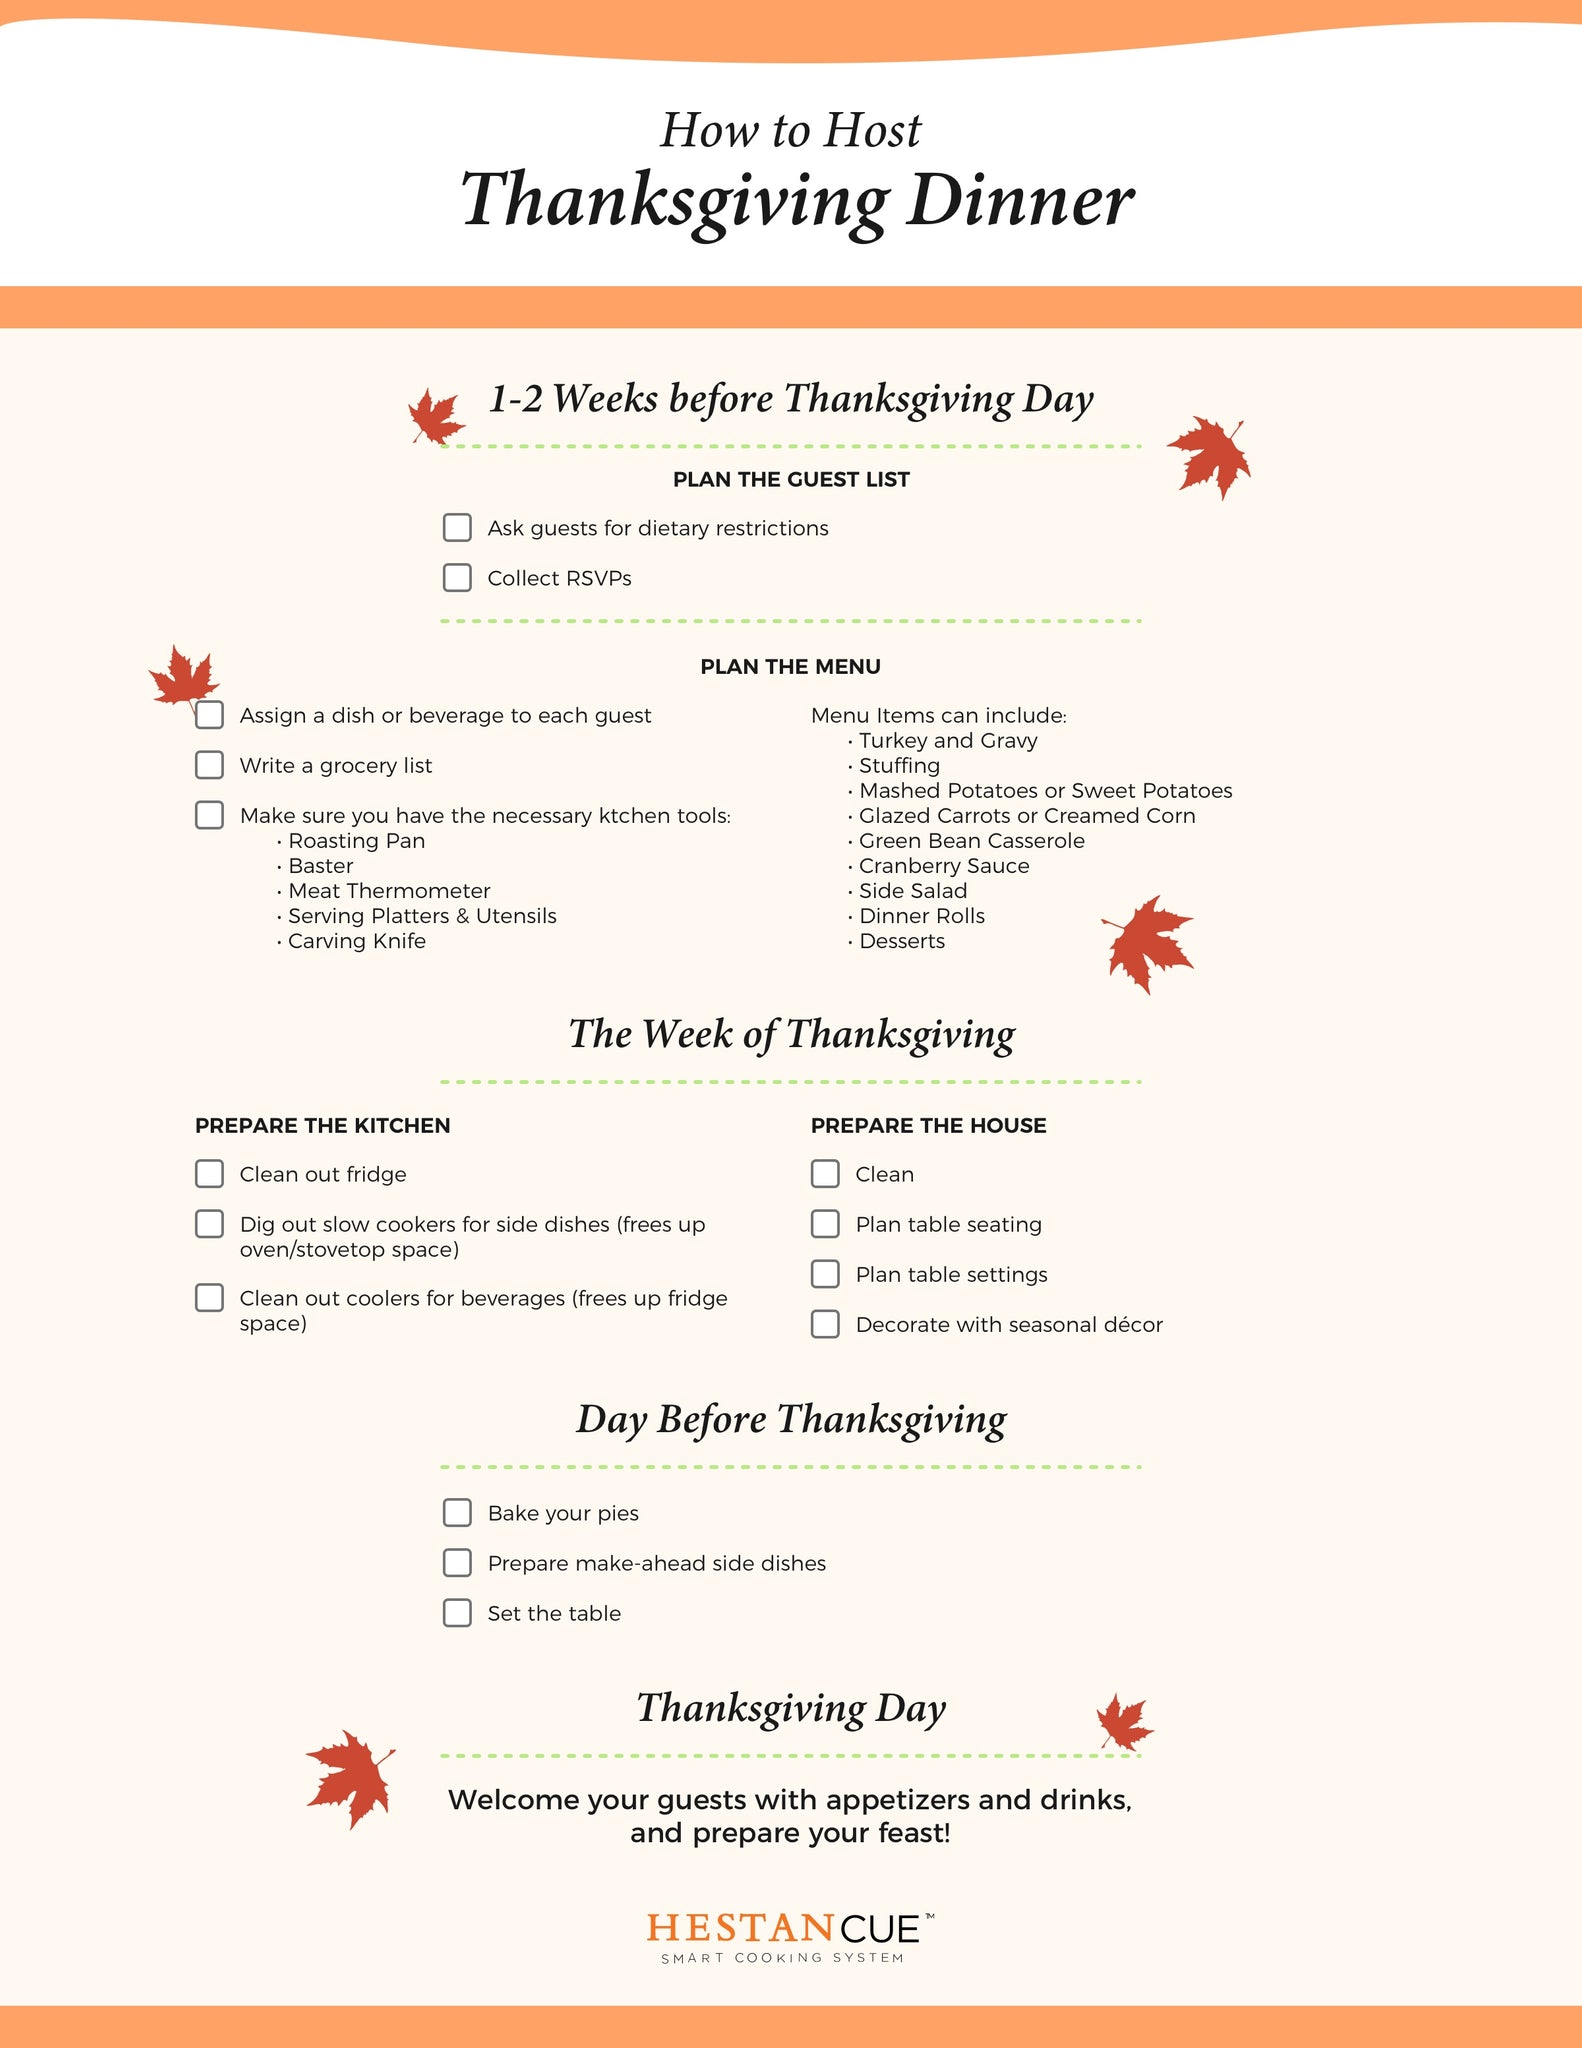 Cue's Practical Guide to Thanksgiving – Hestan Cue